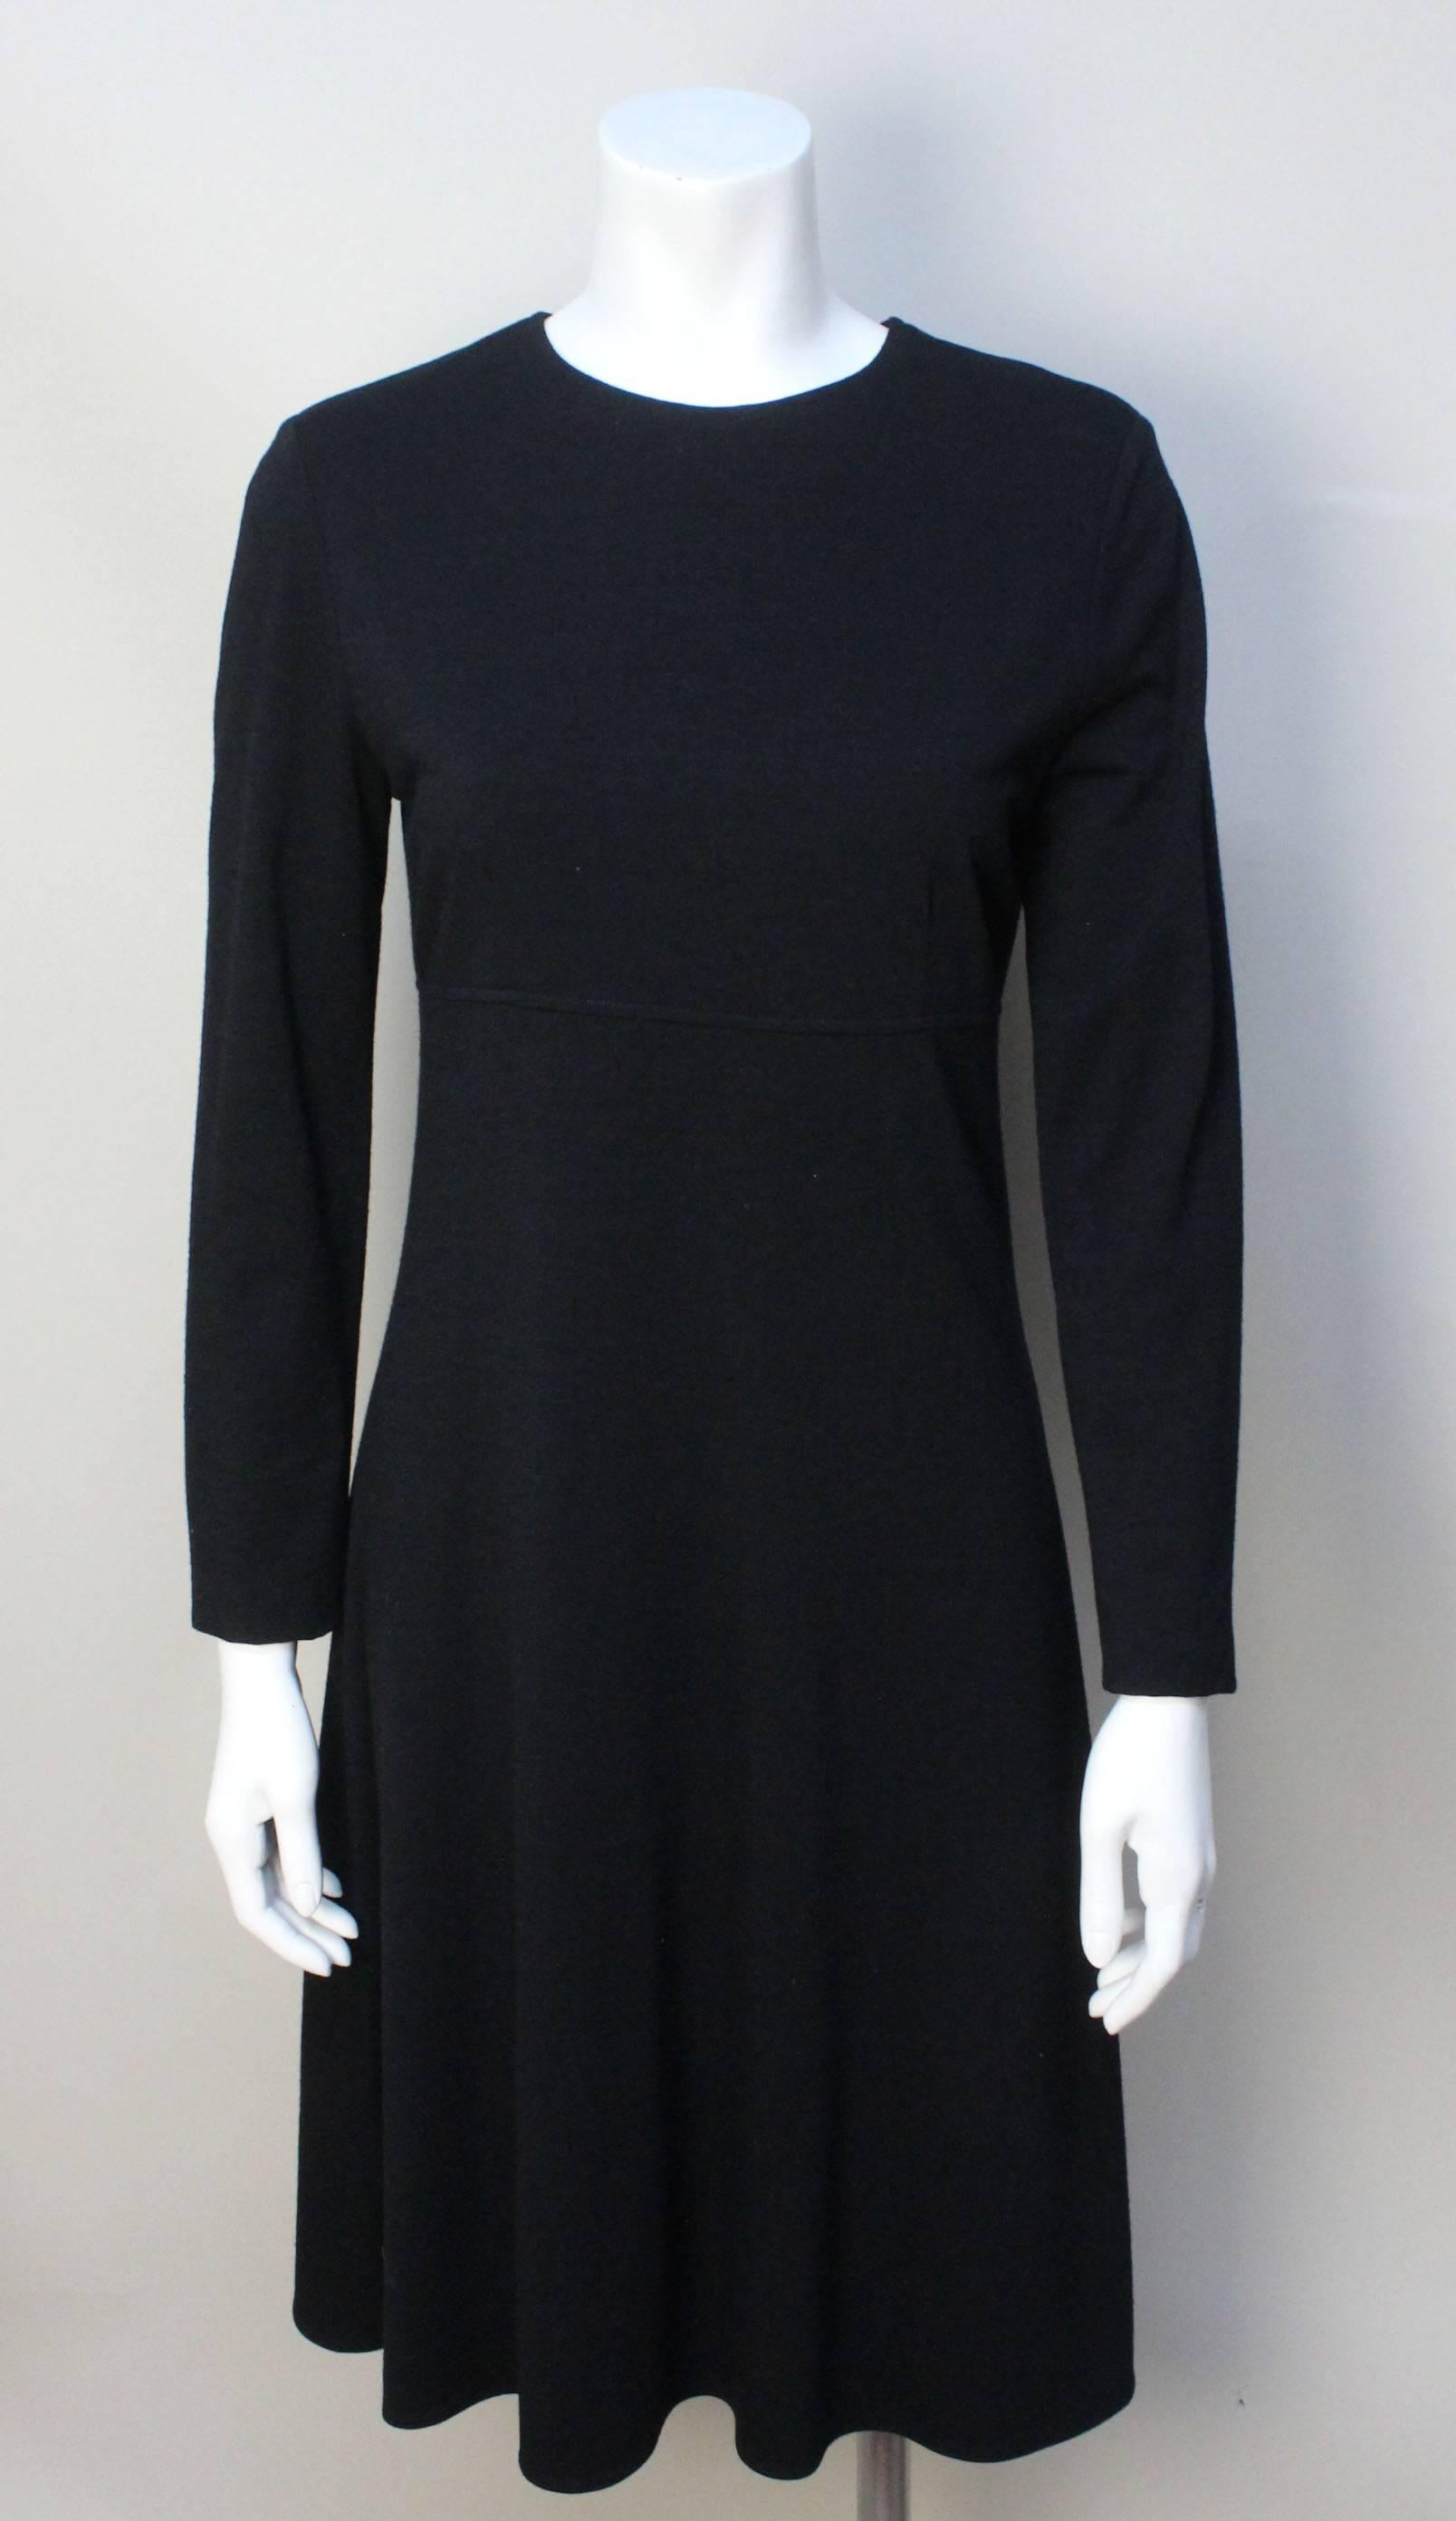 This Calvin Klein dress is simple and elegant. The classic lines make it a versatile dress for day or evening. The fabric is a fine wool that drapes beautifully on the body. It is lined in a silk chiffon. It was originally sold in the penthouse shop